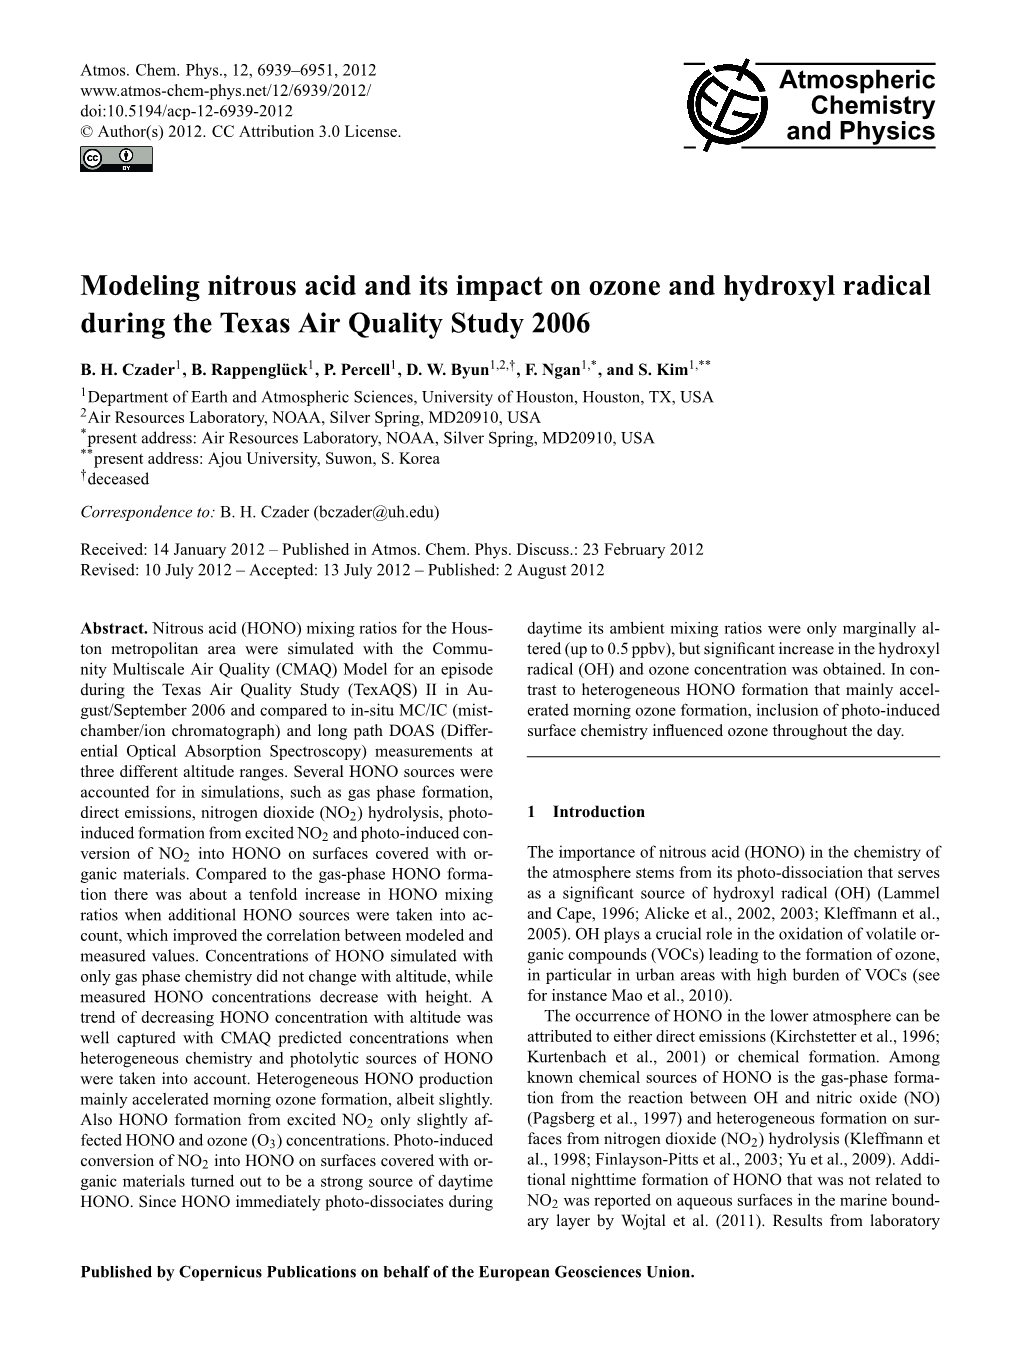 Modeling Nitrous Acid and Its Impact on Ozone and Hydroxyl Radical During the Texas Air Quality Study 2006